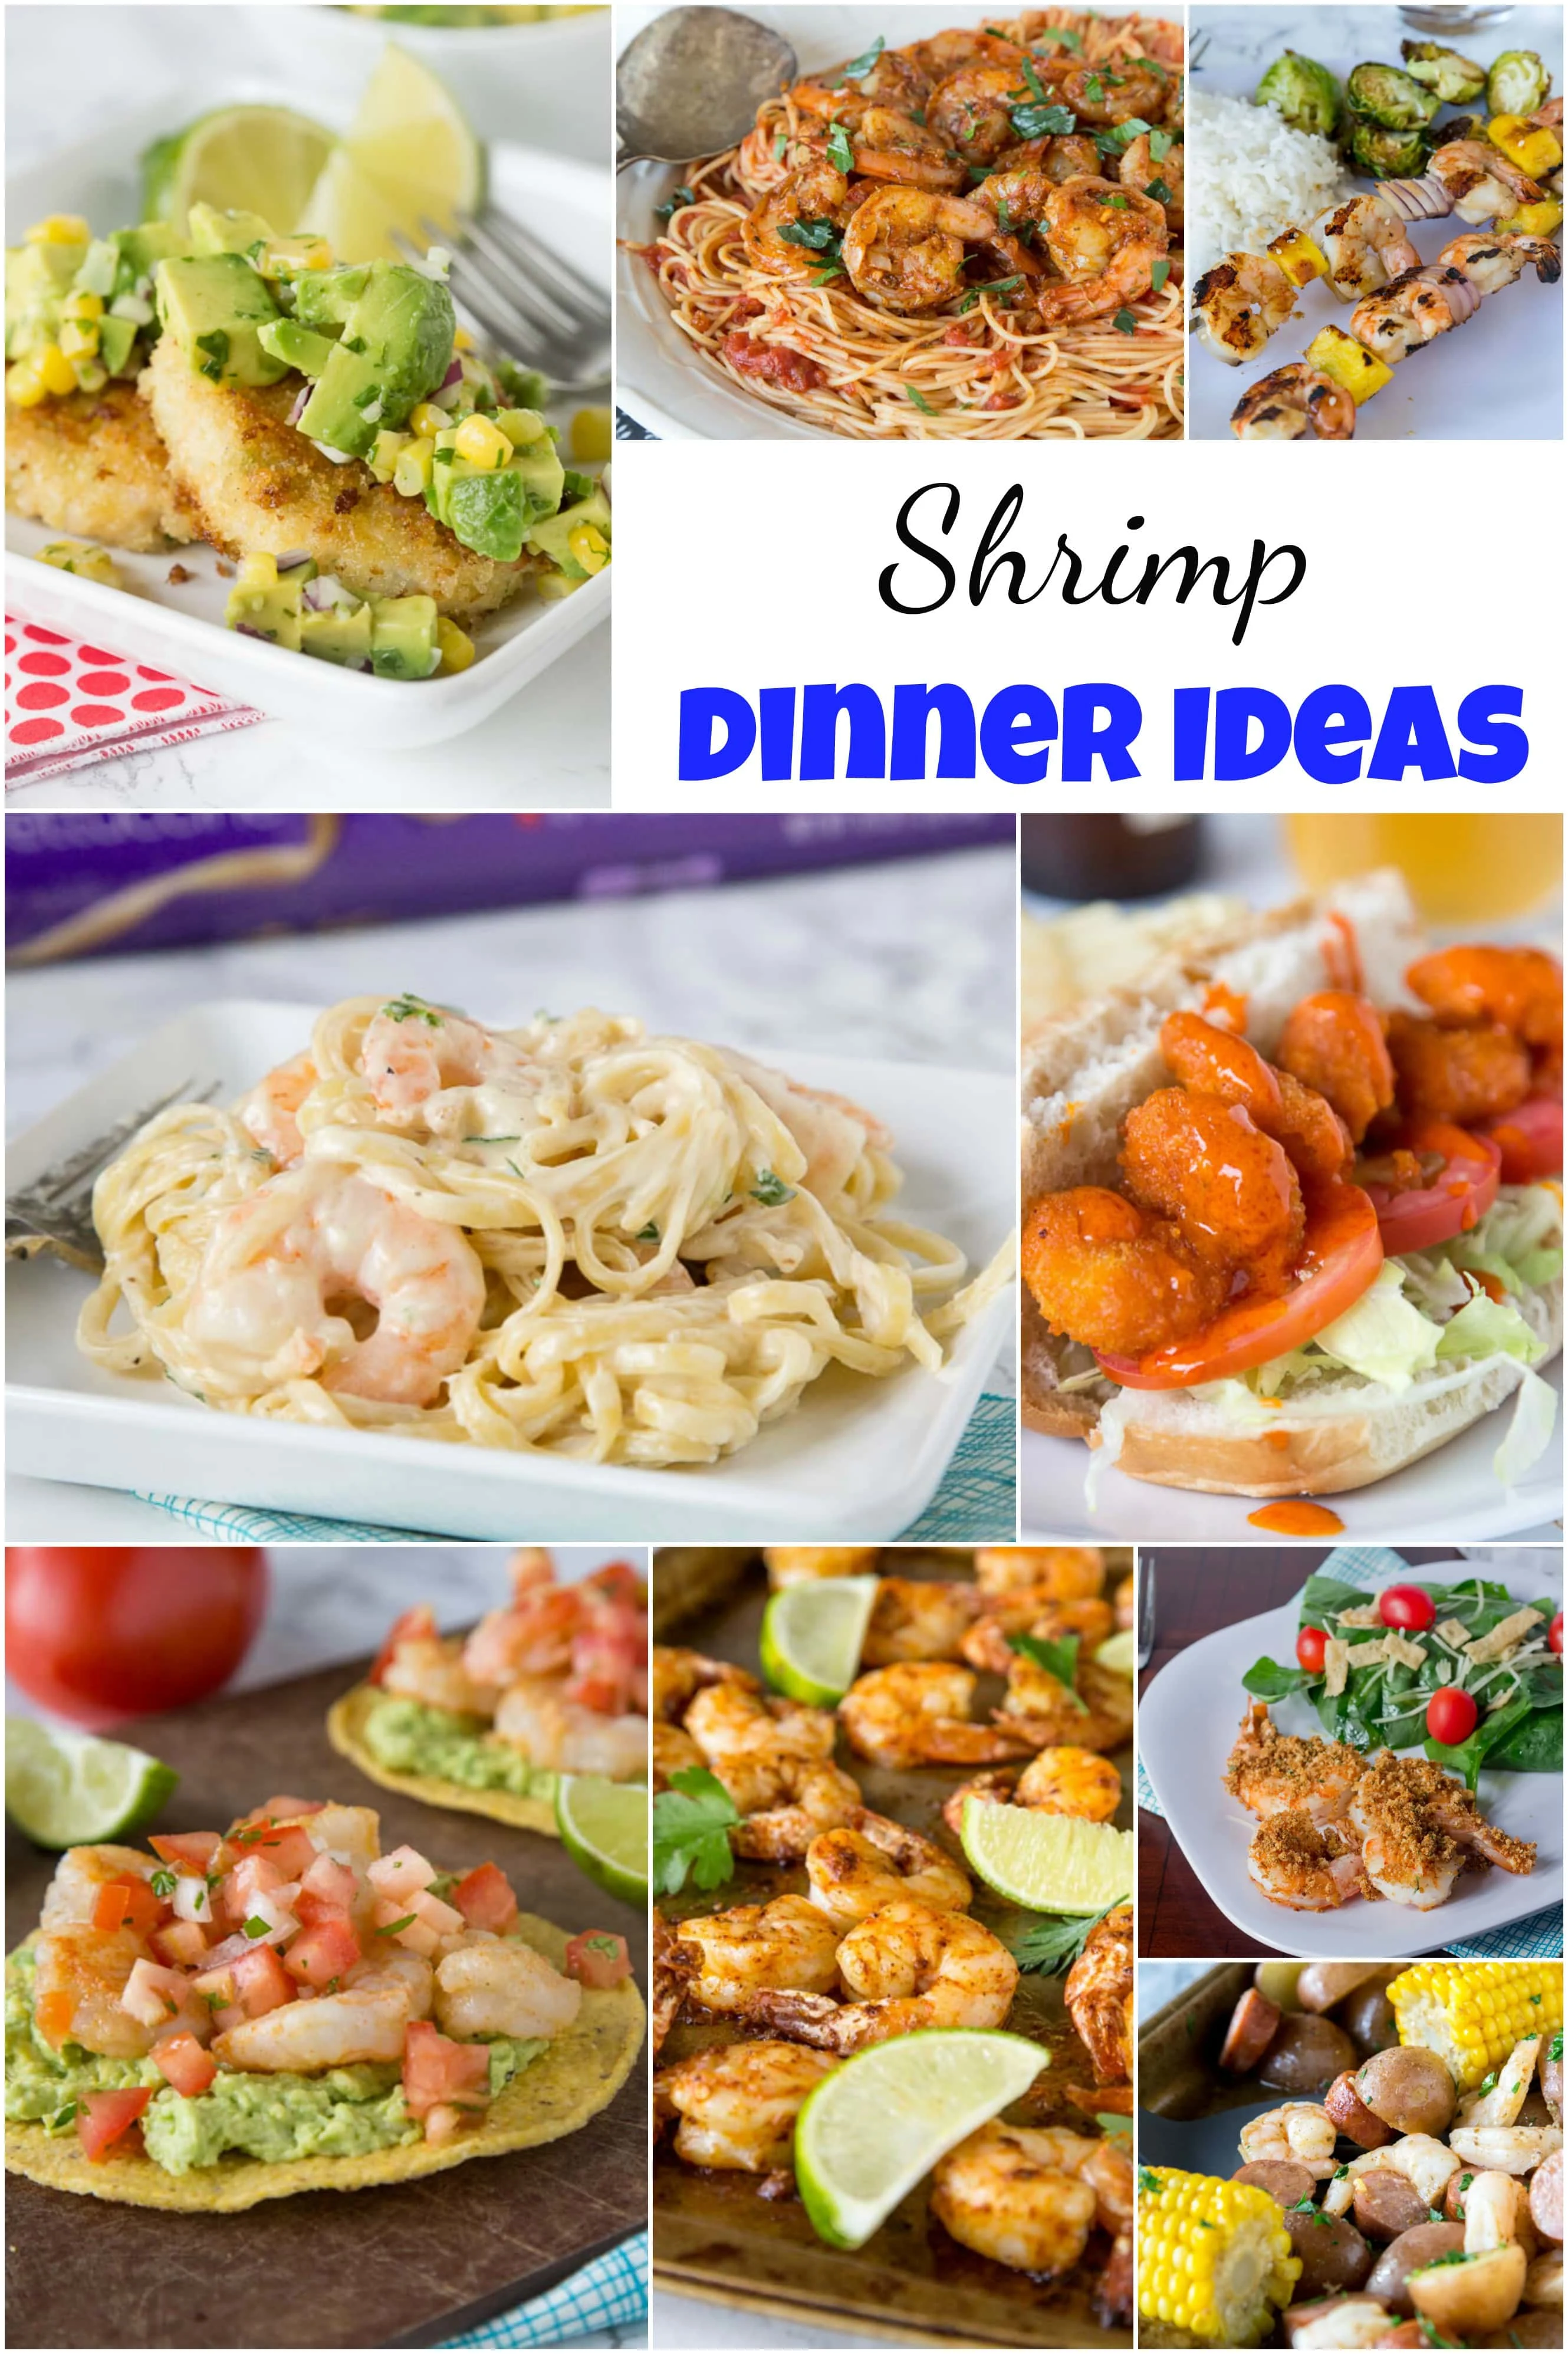 Shrimp Dinner Ideas - Shrimp is a great go to for dinner, it cooks super fast and is good for you too!  These easy shrimp recipes will be become your go to dinner ideas! #shrimprecipes #dinnerideas #food #recipe #dinnerisserved